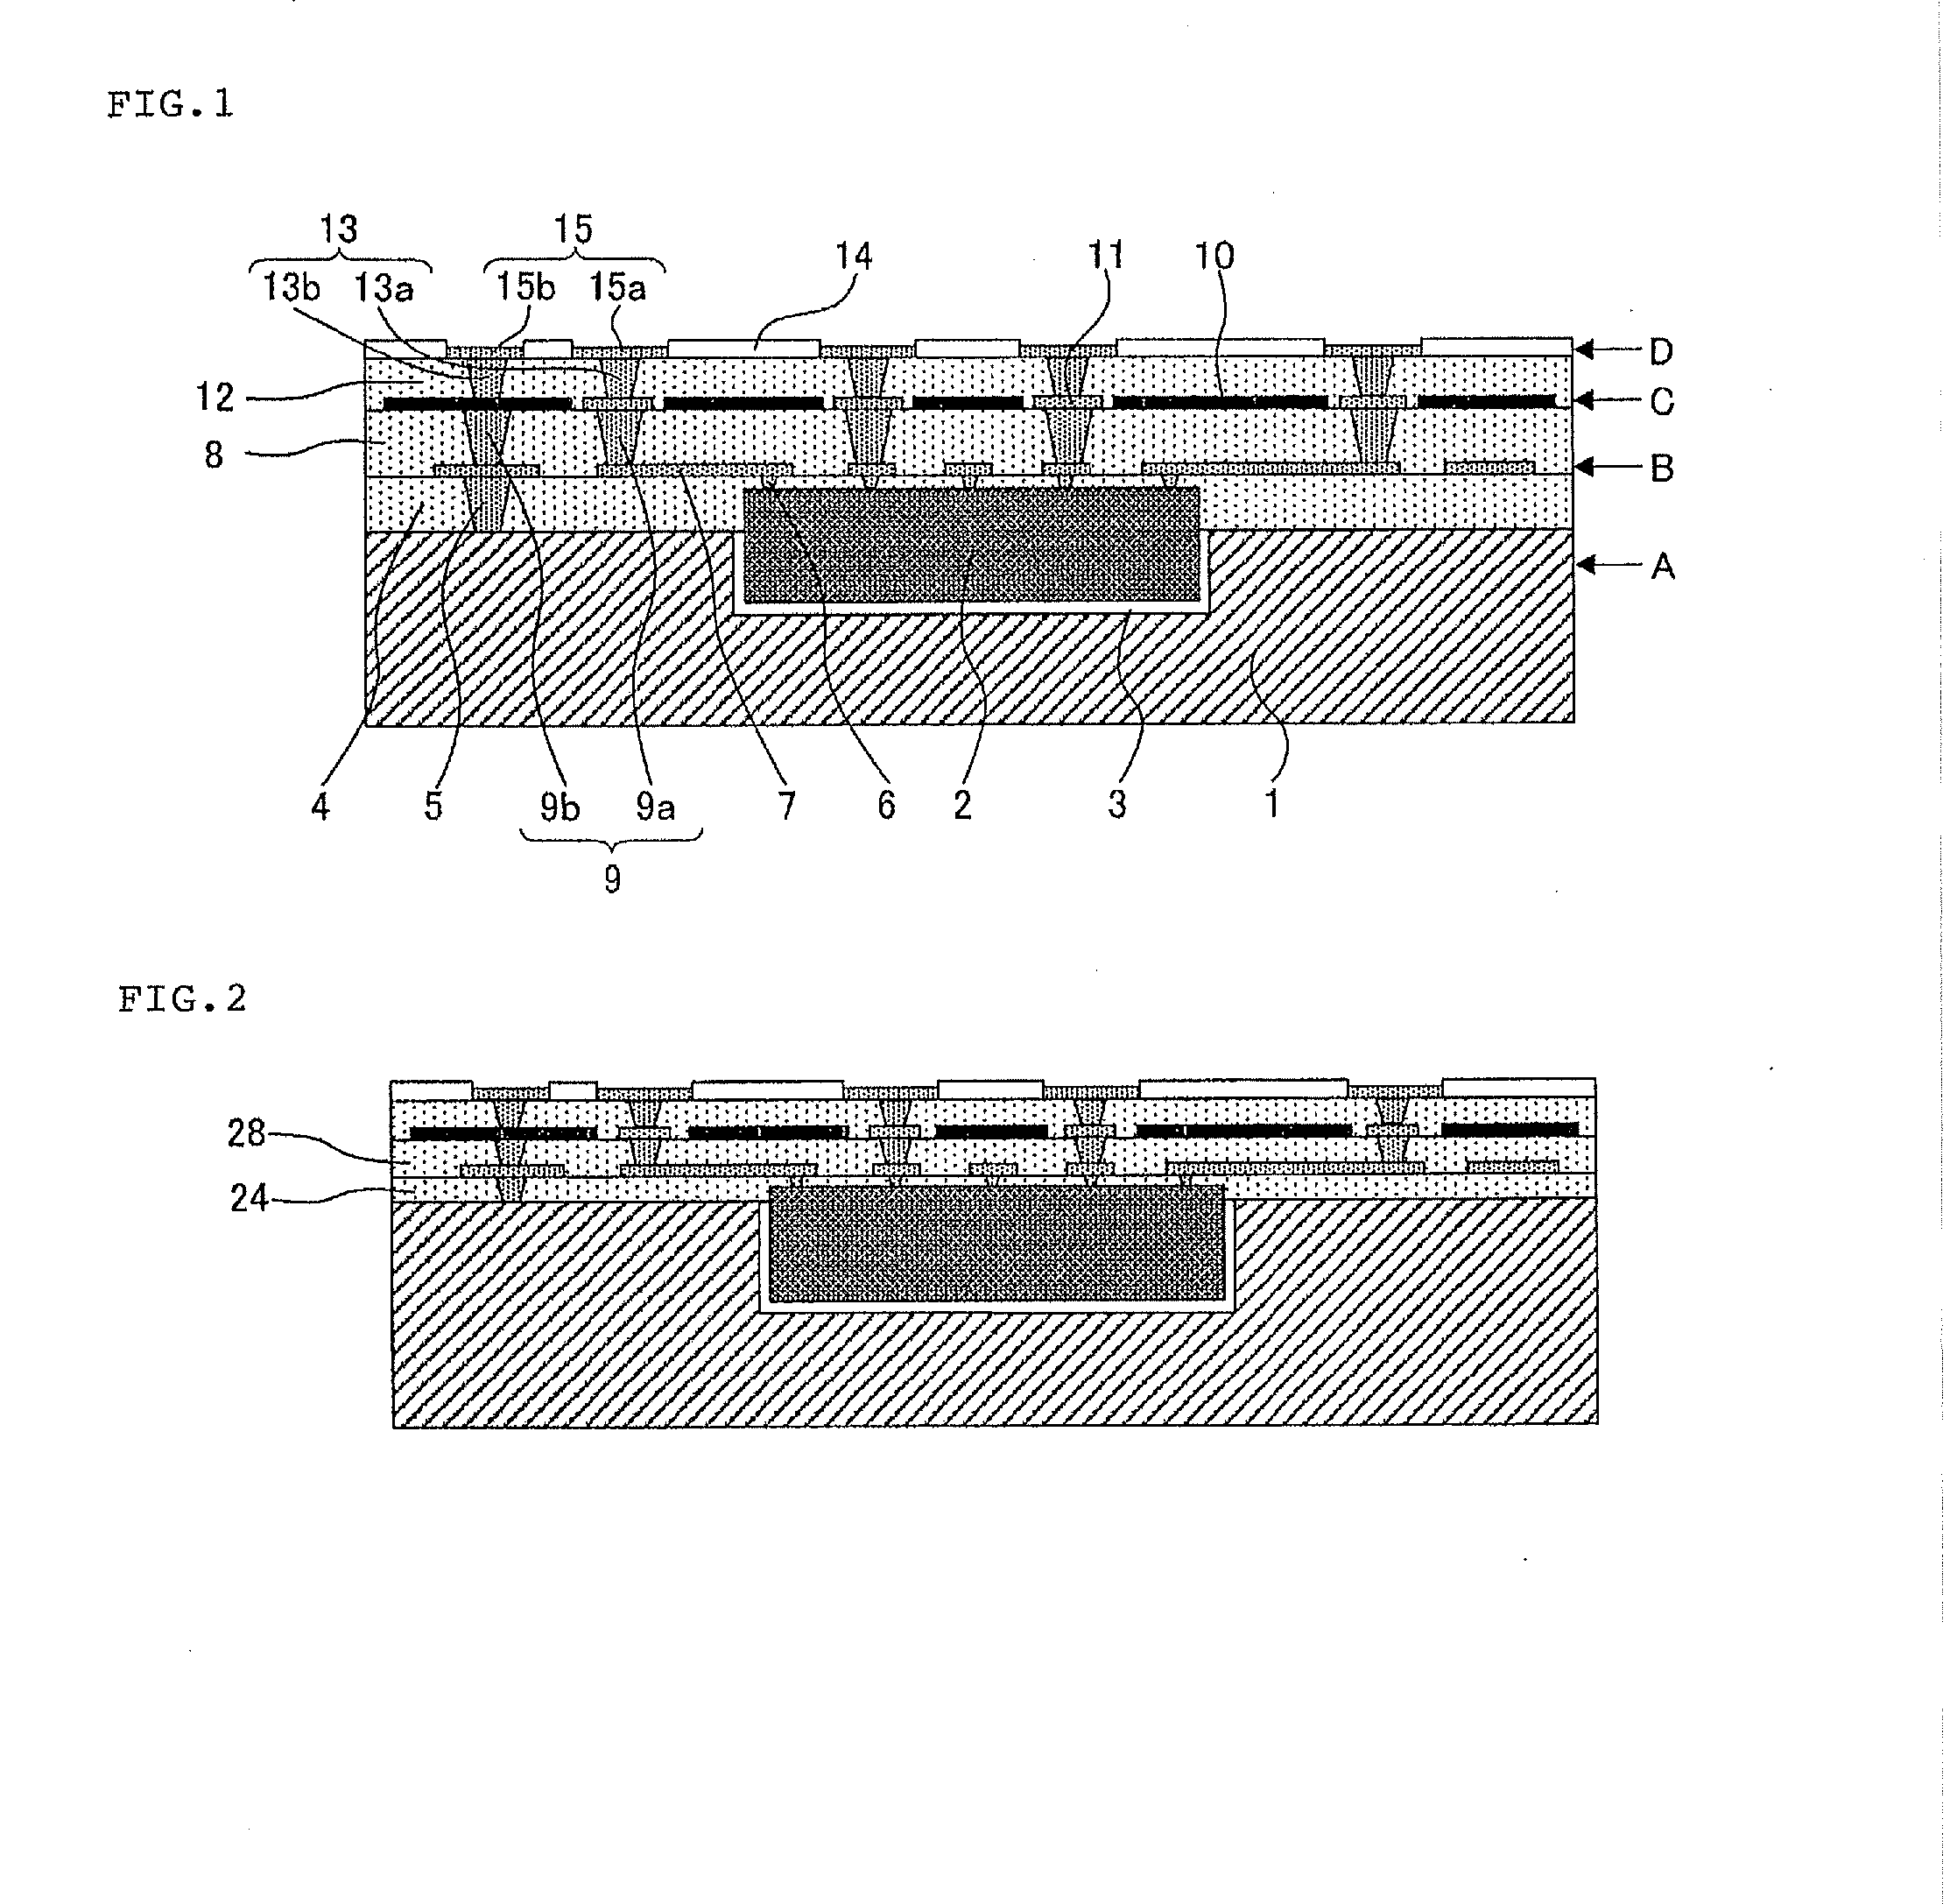 Substrate with built-in functional element